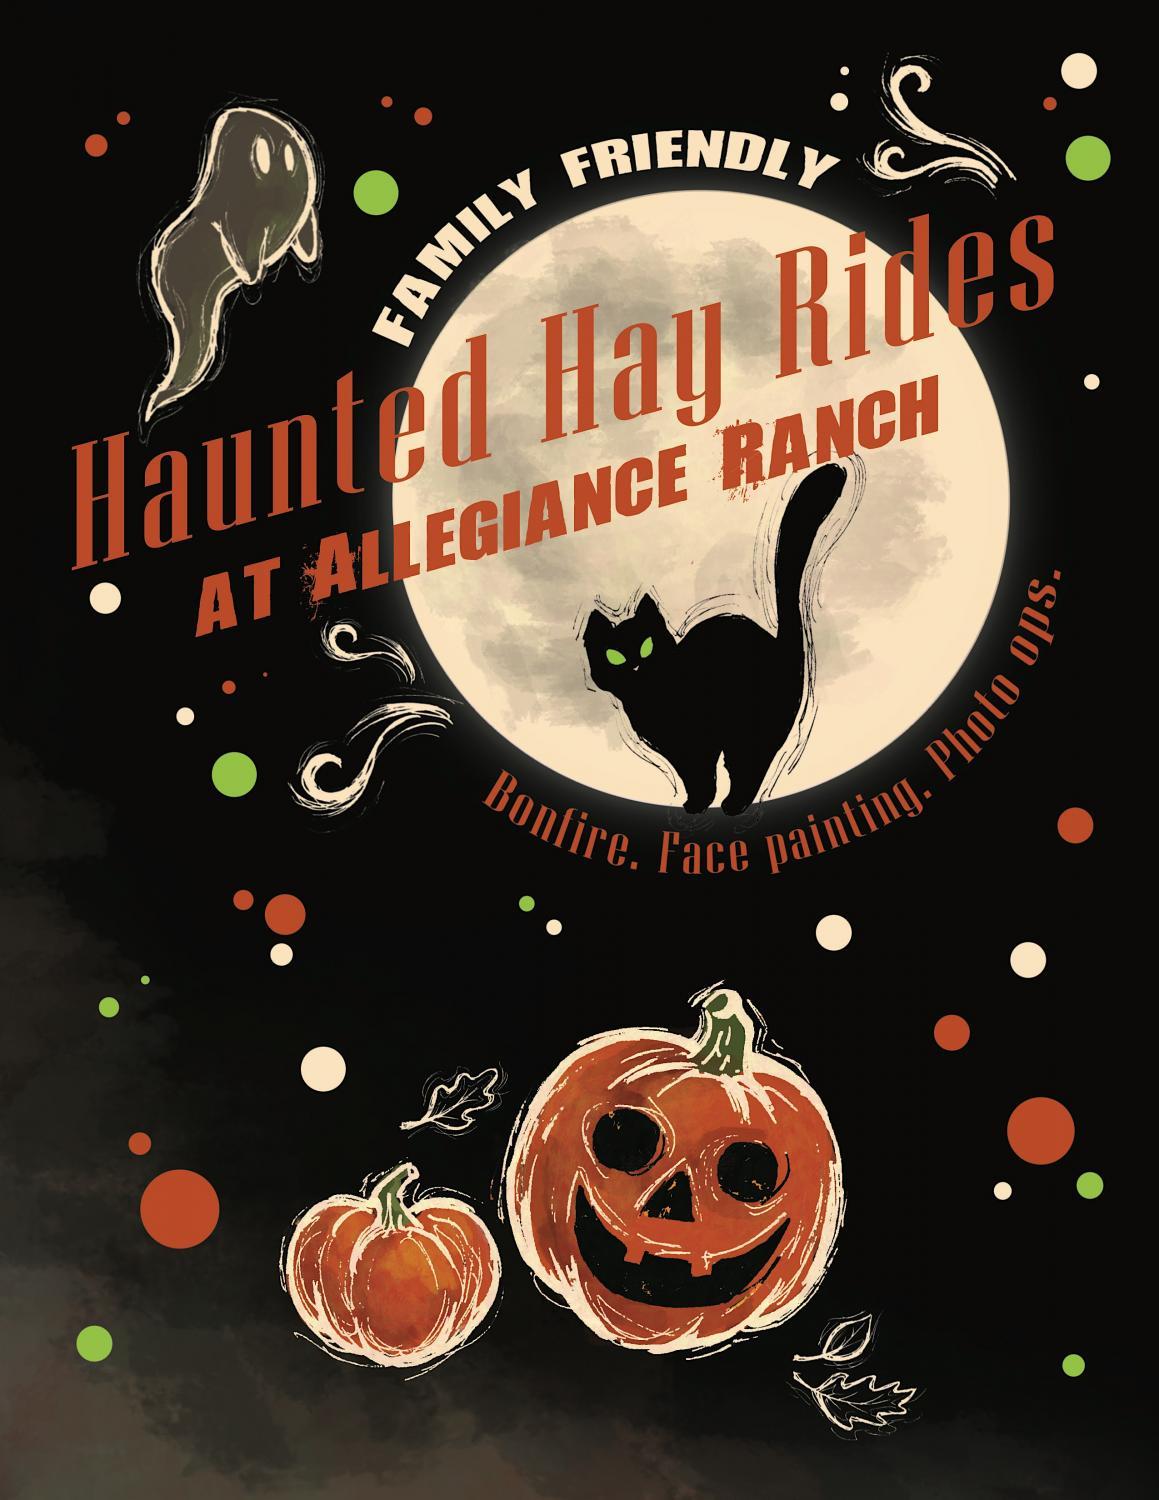 Haunted Hay Rides at Allegiance Ranch
Sat Oct 22, 6:00 PM - Sat Oct 22, 9:00 PM
in 2 days